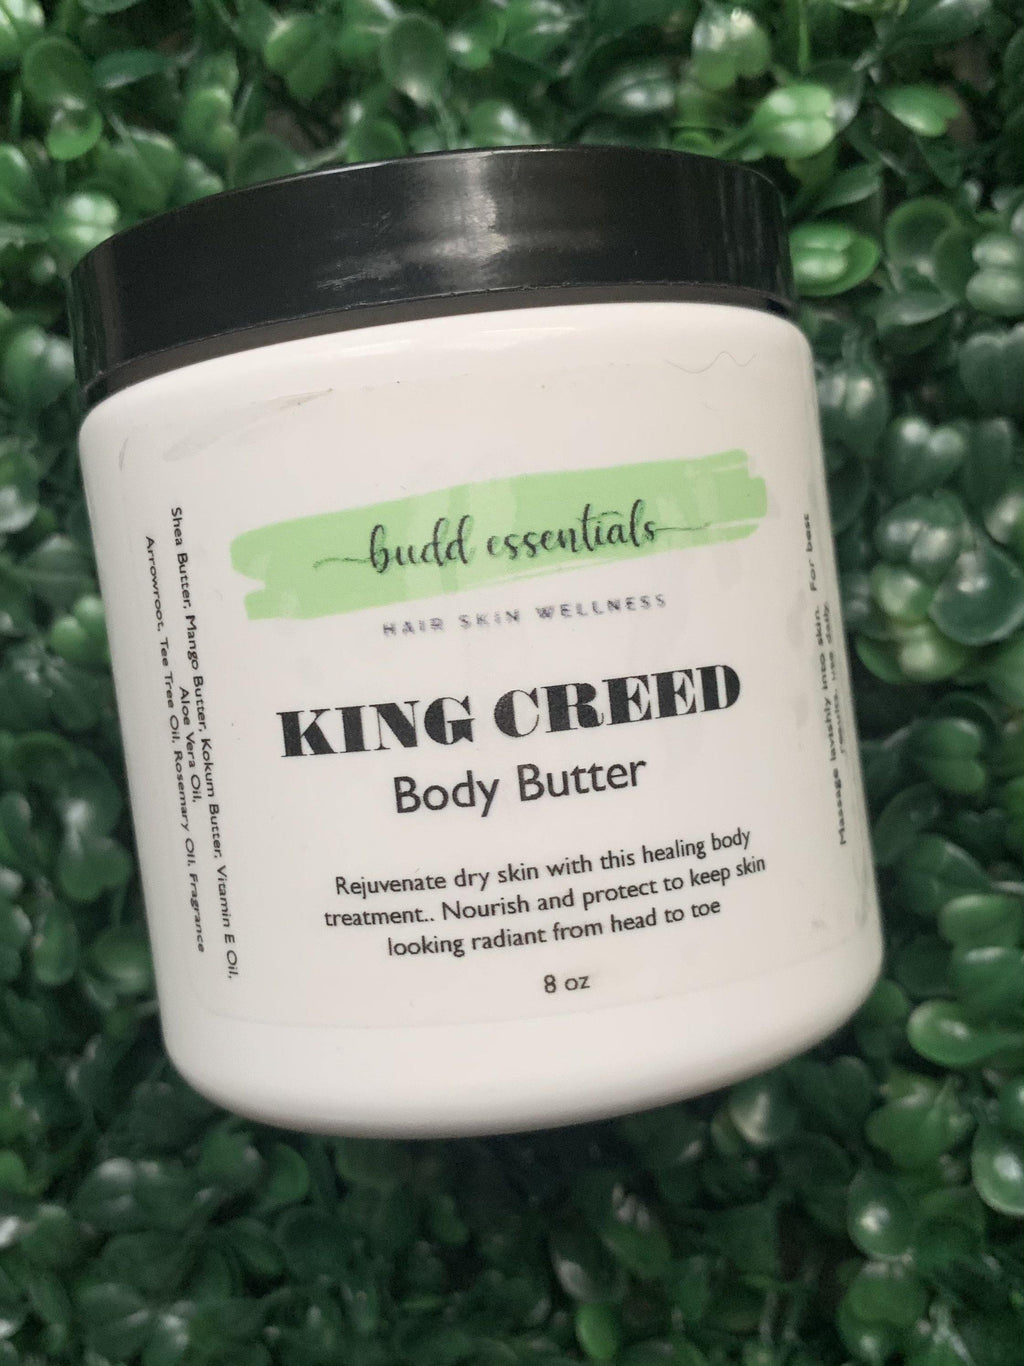 King Creed Body Butter - Budd Essentials